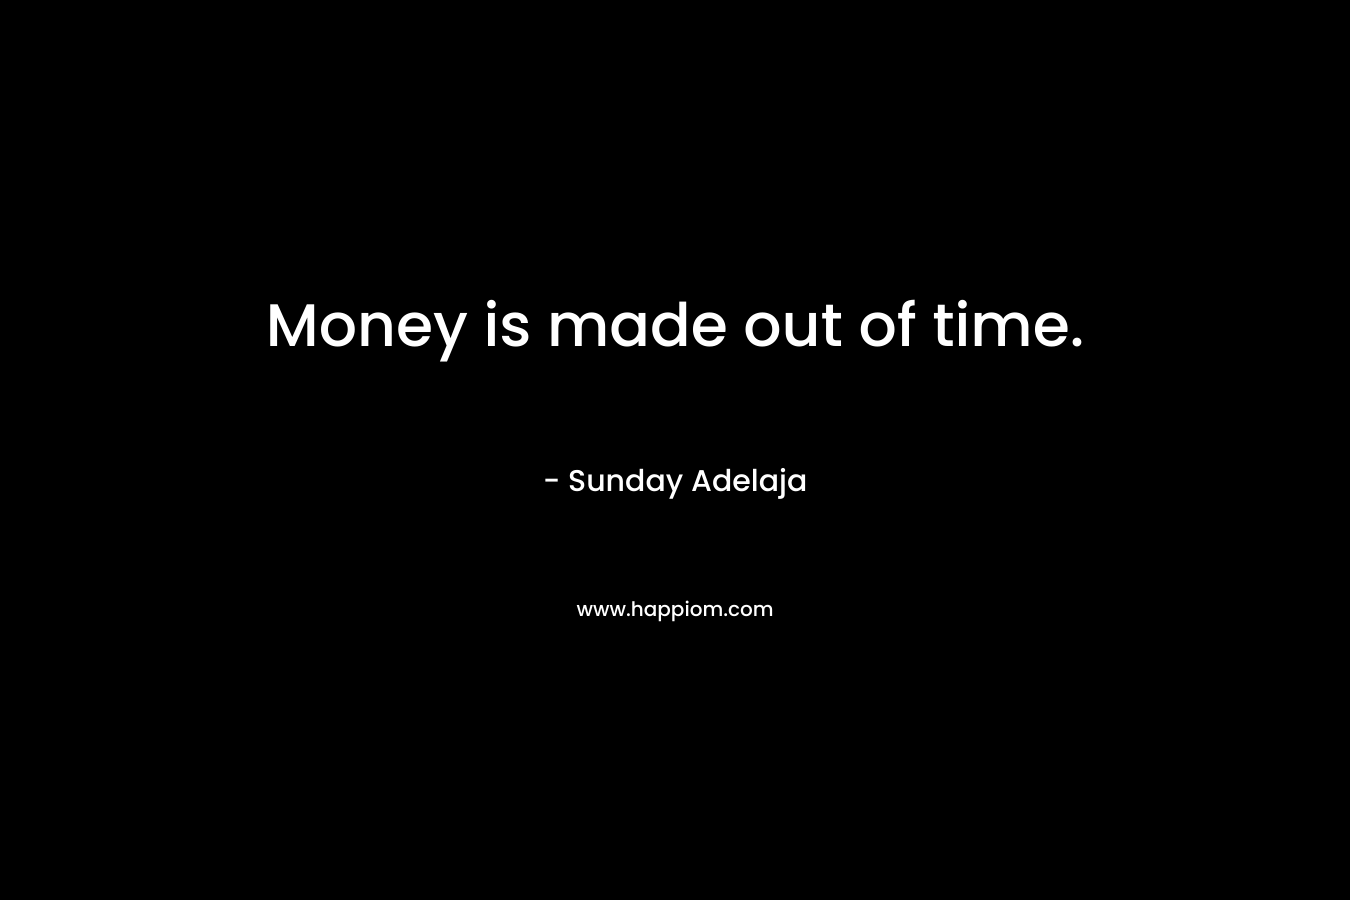 Money is made out of time.